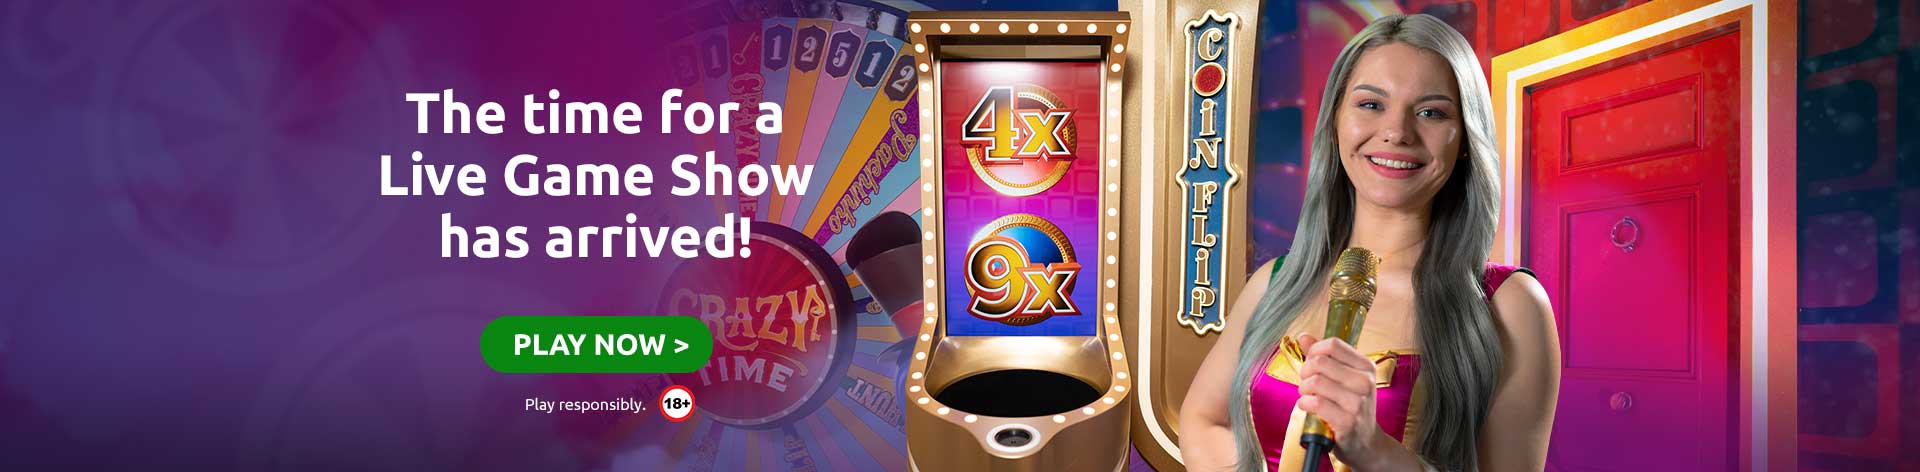 The time for a Live Game Show has arrived! Play now!